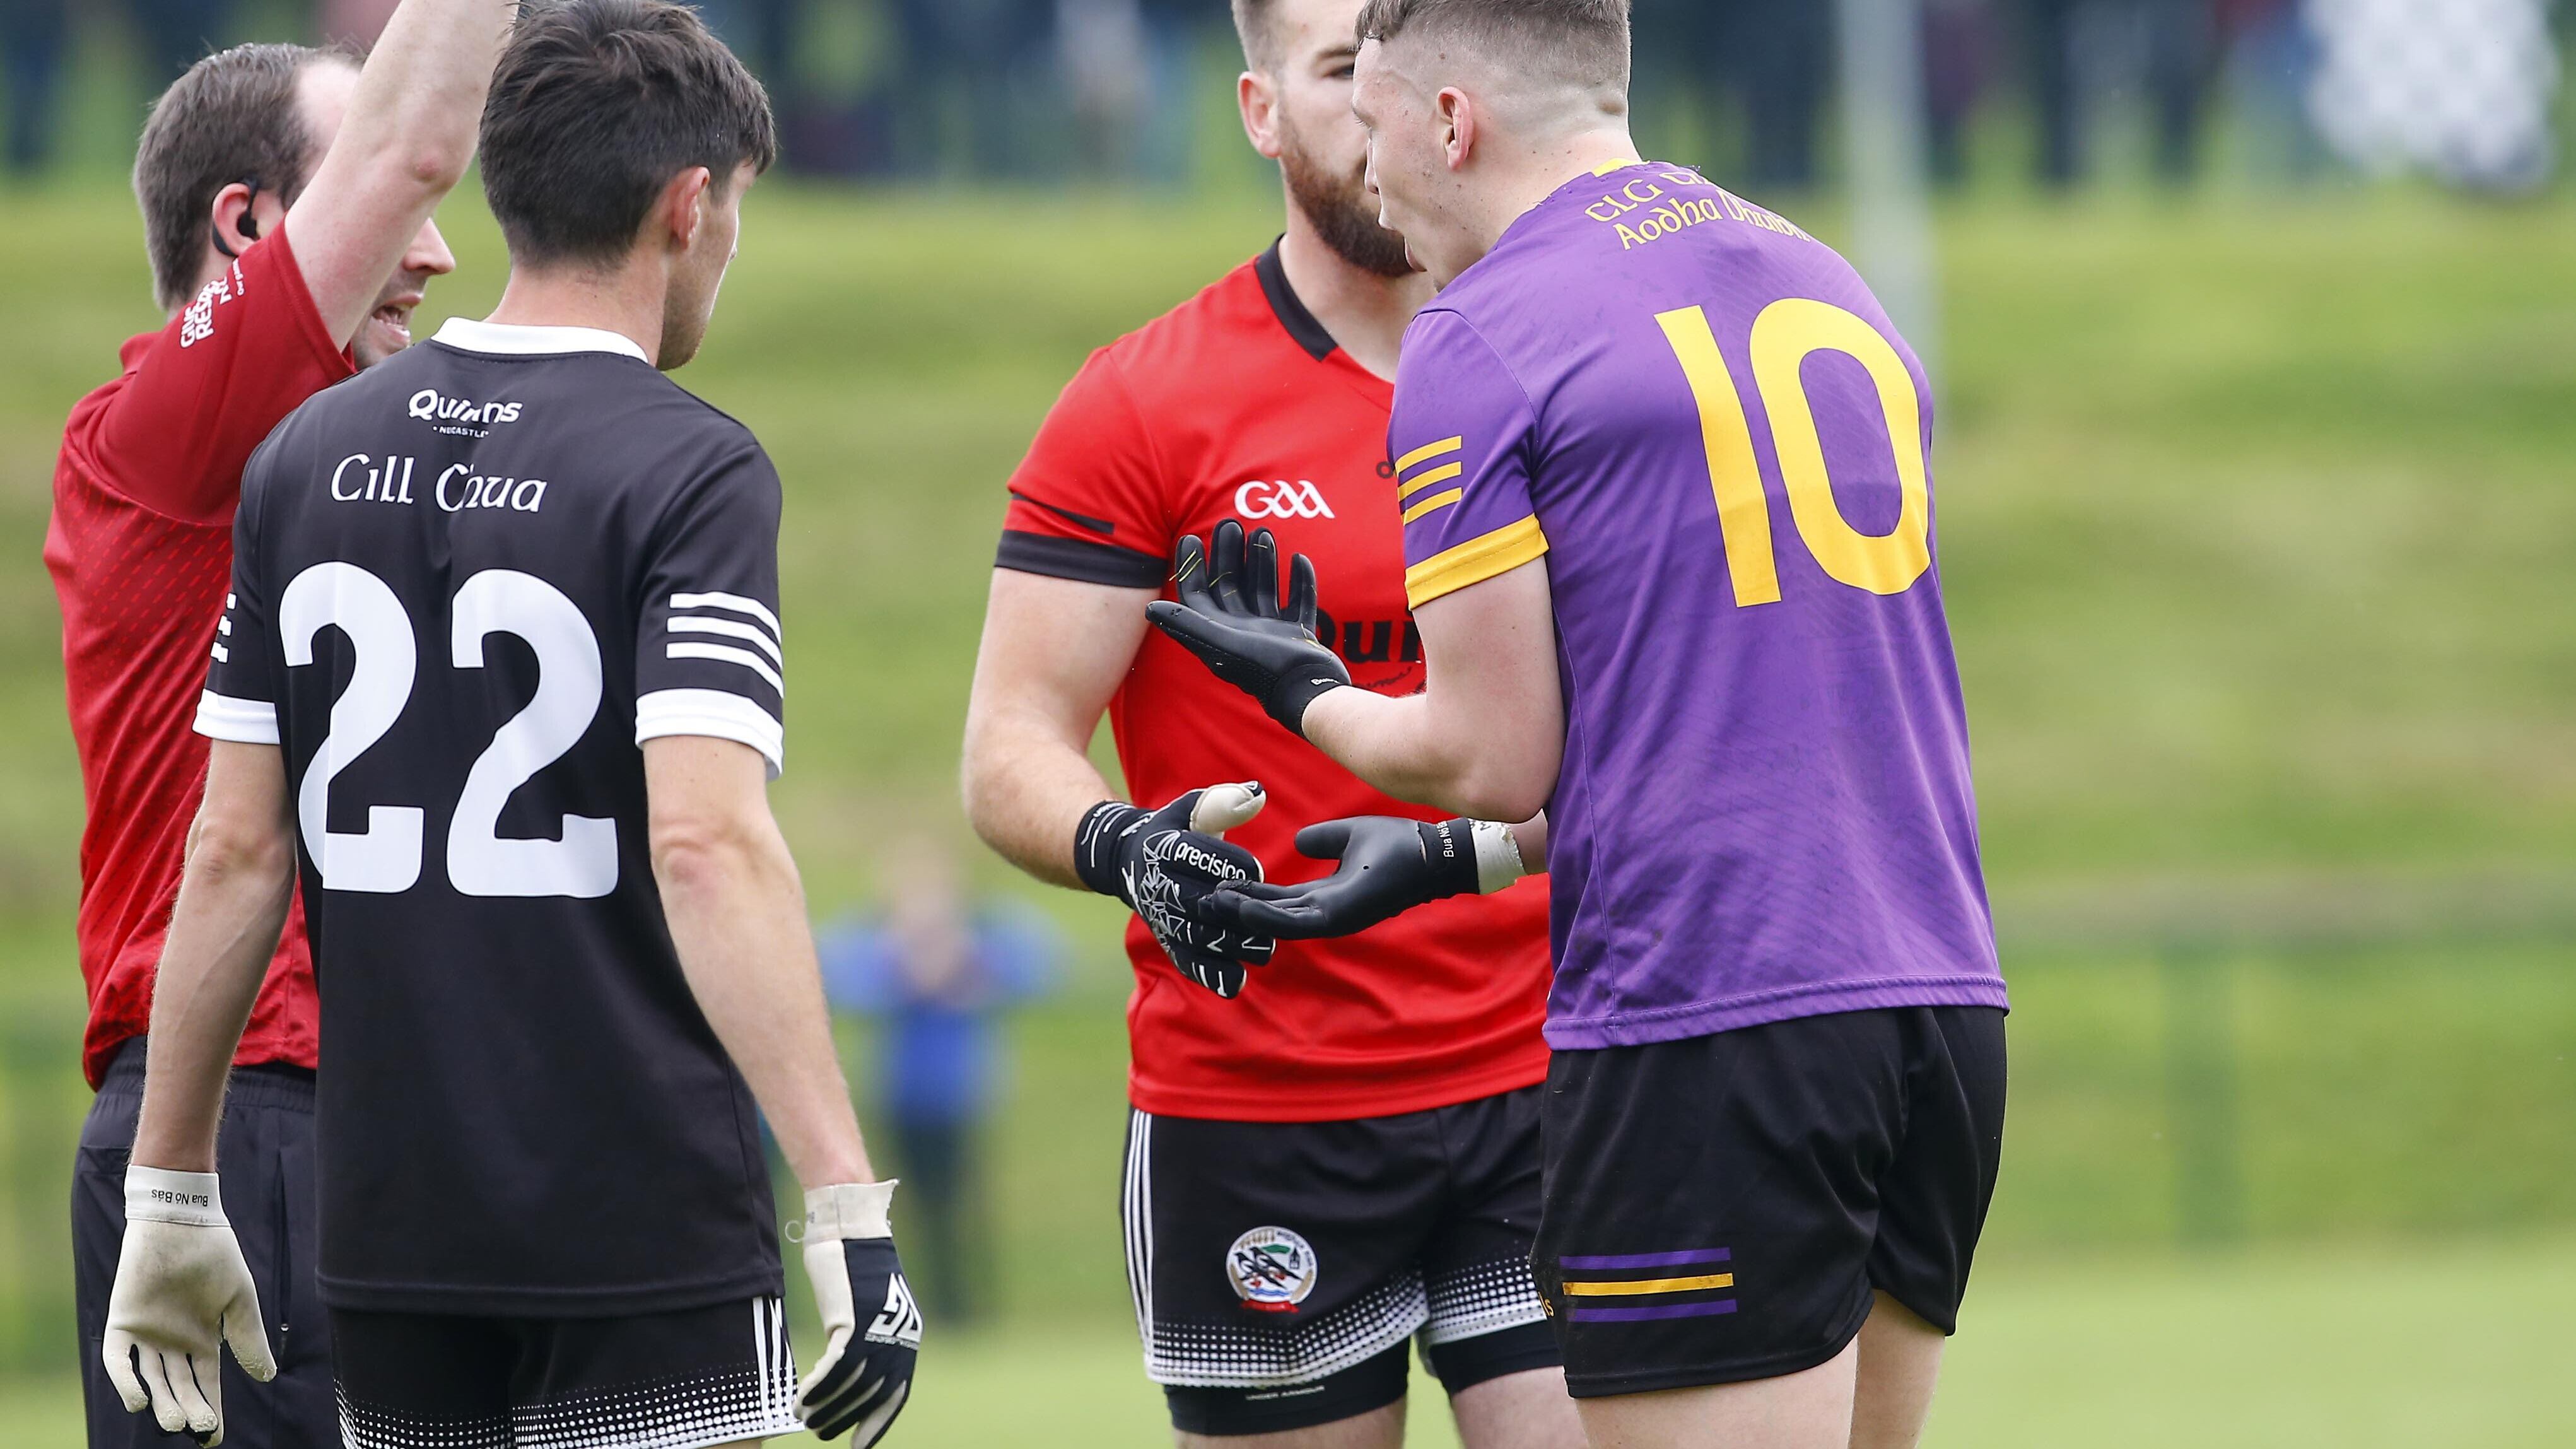 Referee Miceal Moore shows a red card to Carryduff's Cian Clinton just before half-time in Sunday's Down SFC quarter-final clash